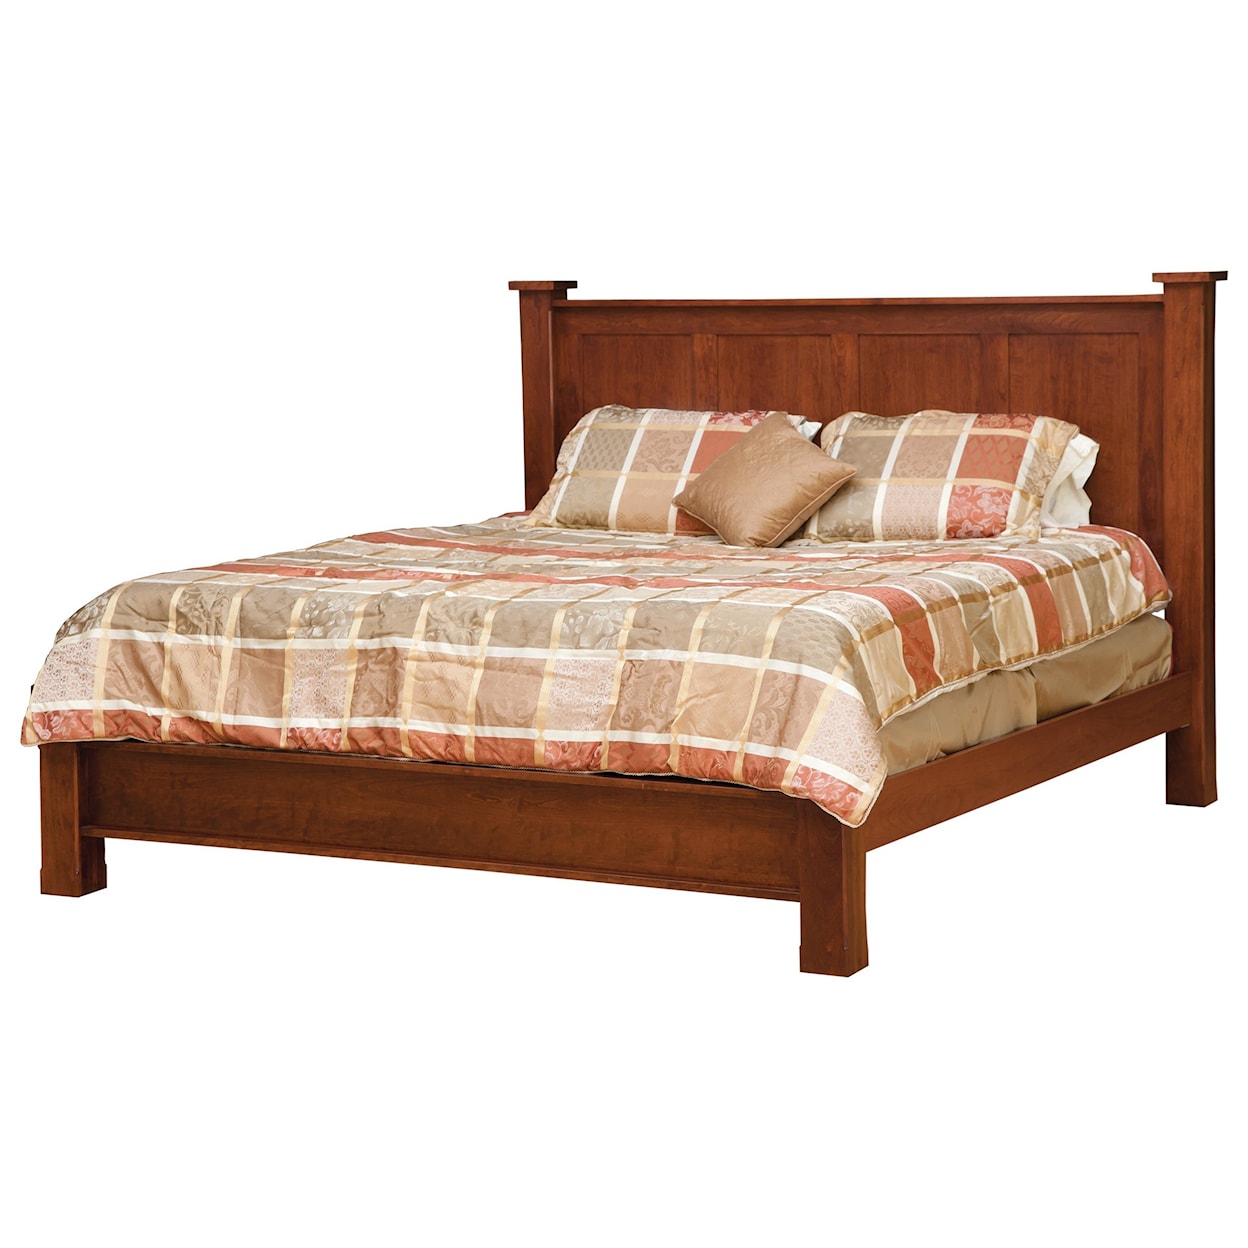 Daniel's Amish Treasure King Bed with Low Footboard